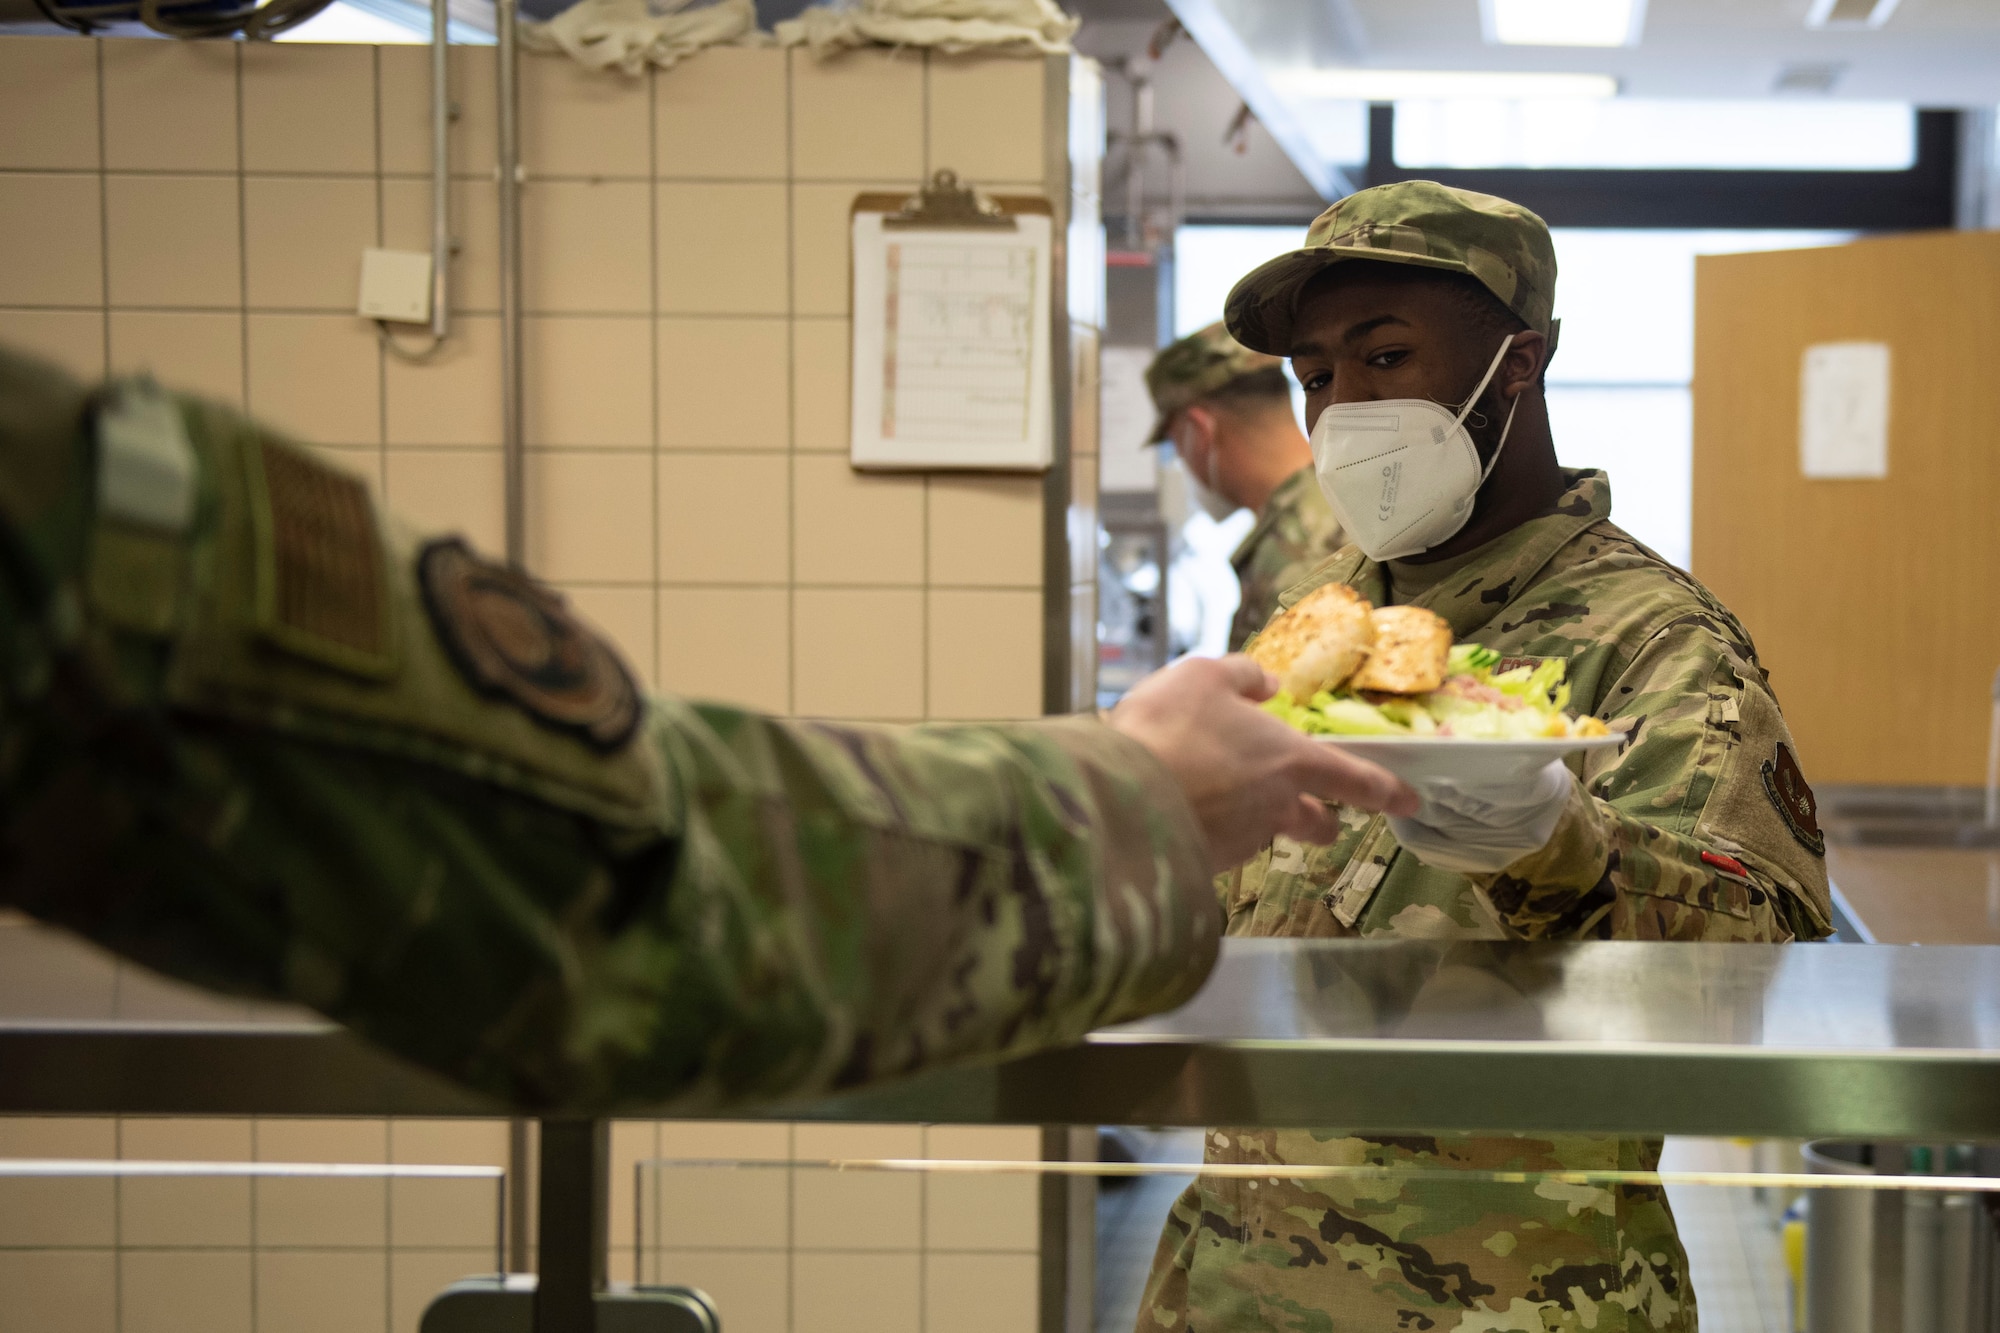 U.S. Air Force Senior Airman Andrew Logwood, 702nd Mission Support Flight dining facility storeroom manager, serves guests lunch in the dining facility, April 15, 2020, at the 702nd Munitions Support Squadron. During the COVID-19 pandemic, 702nd MUNSS MSF Airmen continued providing service, support and morale to 702 MUNSS Airmen by continuous training and listening to feedback from guests. (U.S. Air Force photo by Senior Airman Melody W. Howley)